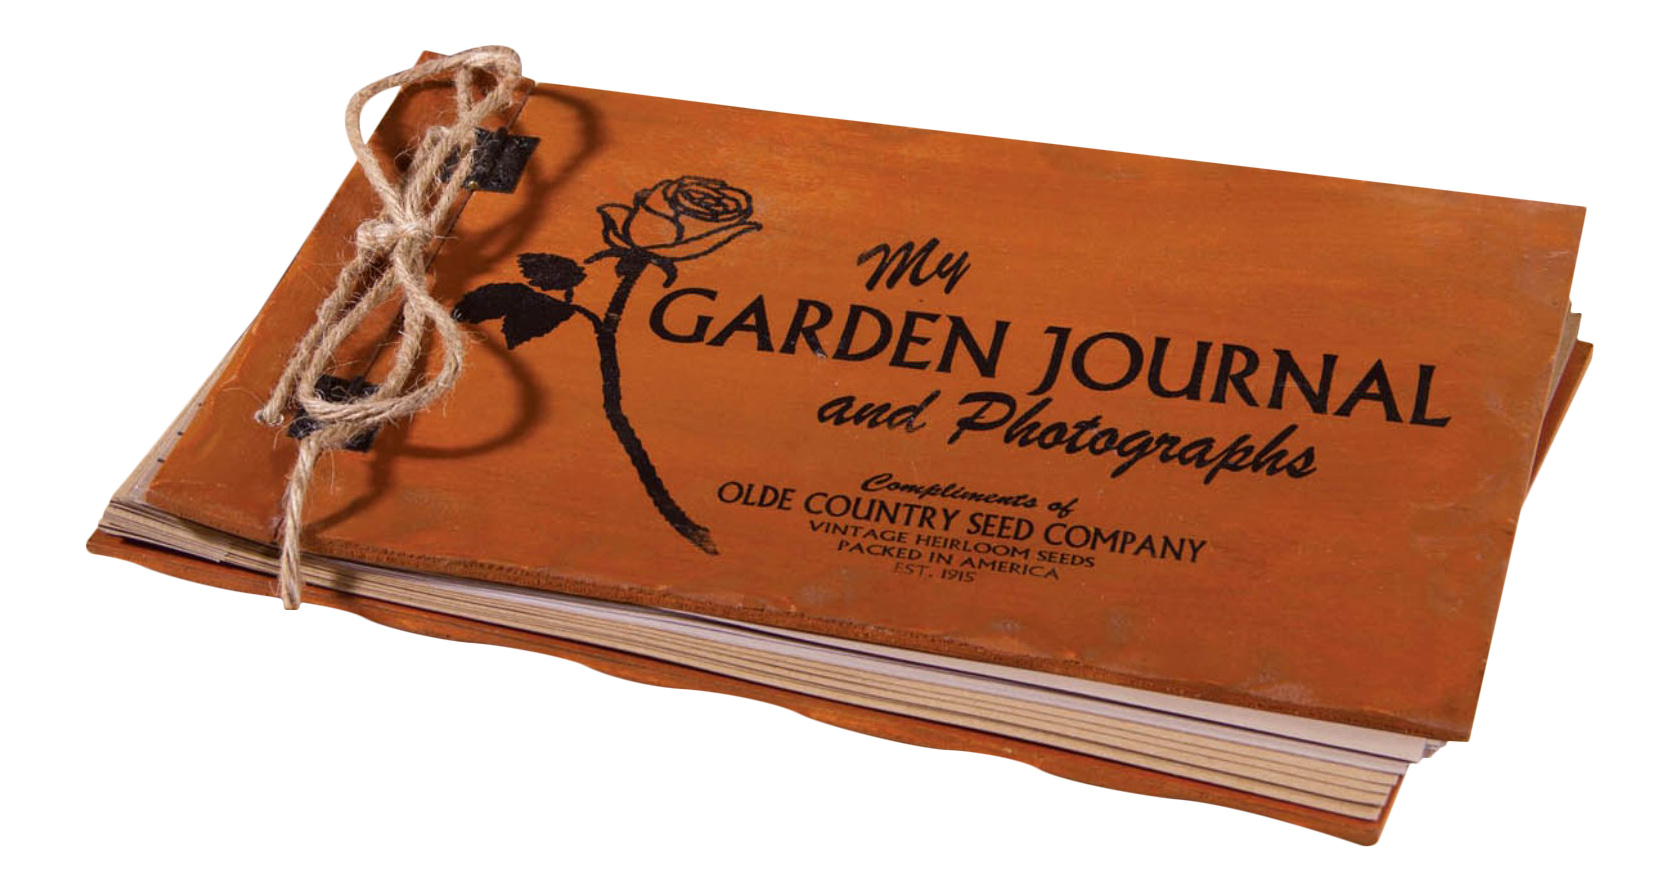 Olde Country Seed Company Garden Journal Photo Album Vintage Look Wood Covers